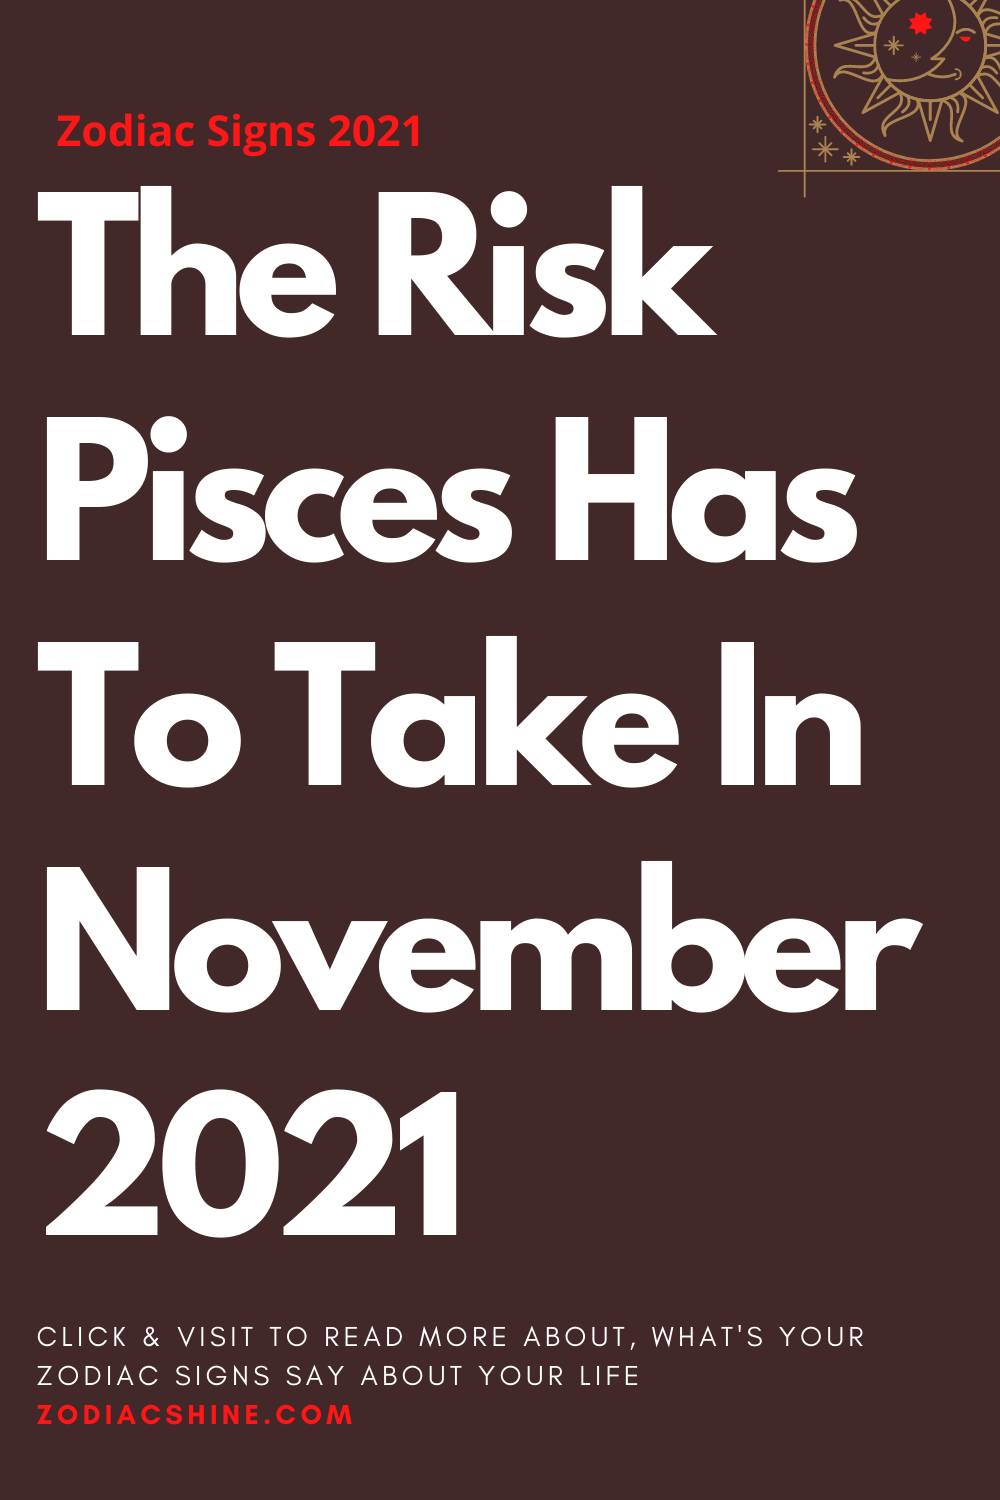 The Risk Pisces Has To Take In November 2021